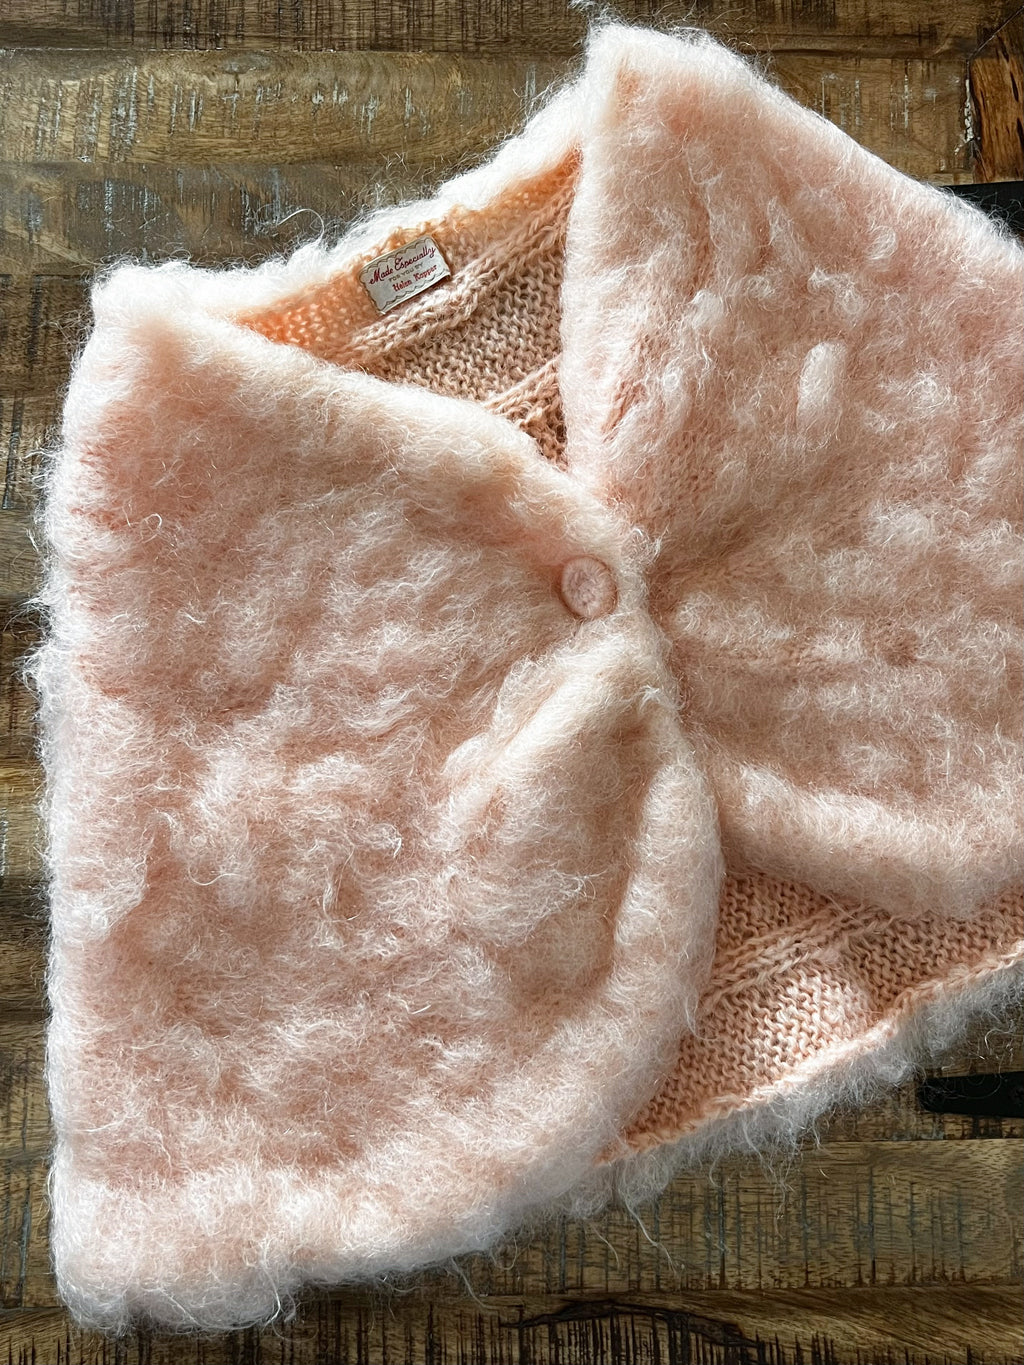 Vintage 1950s Hand-Knit Mohair Capelet - Perf Pastel Pink Fuzzy Soft Shoulder Cropped Shawl Fits Most